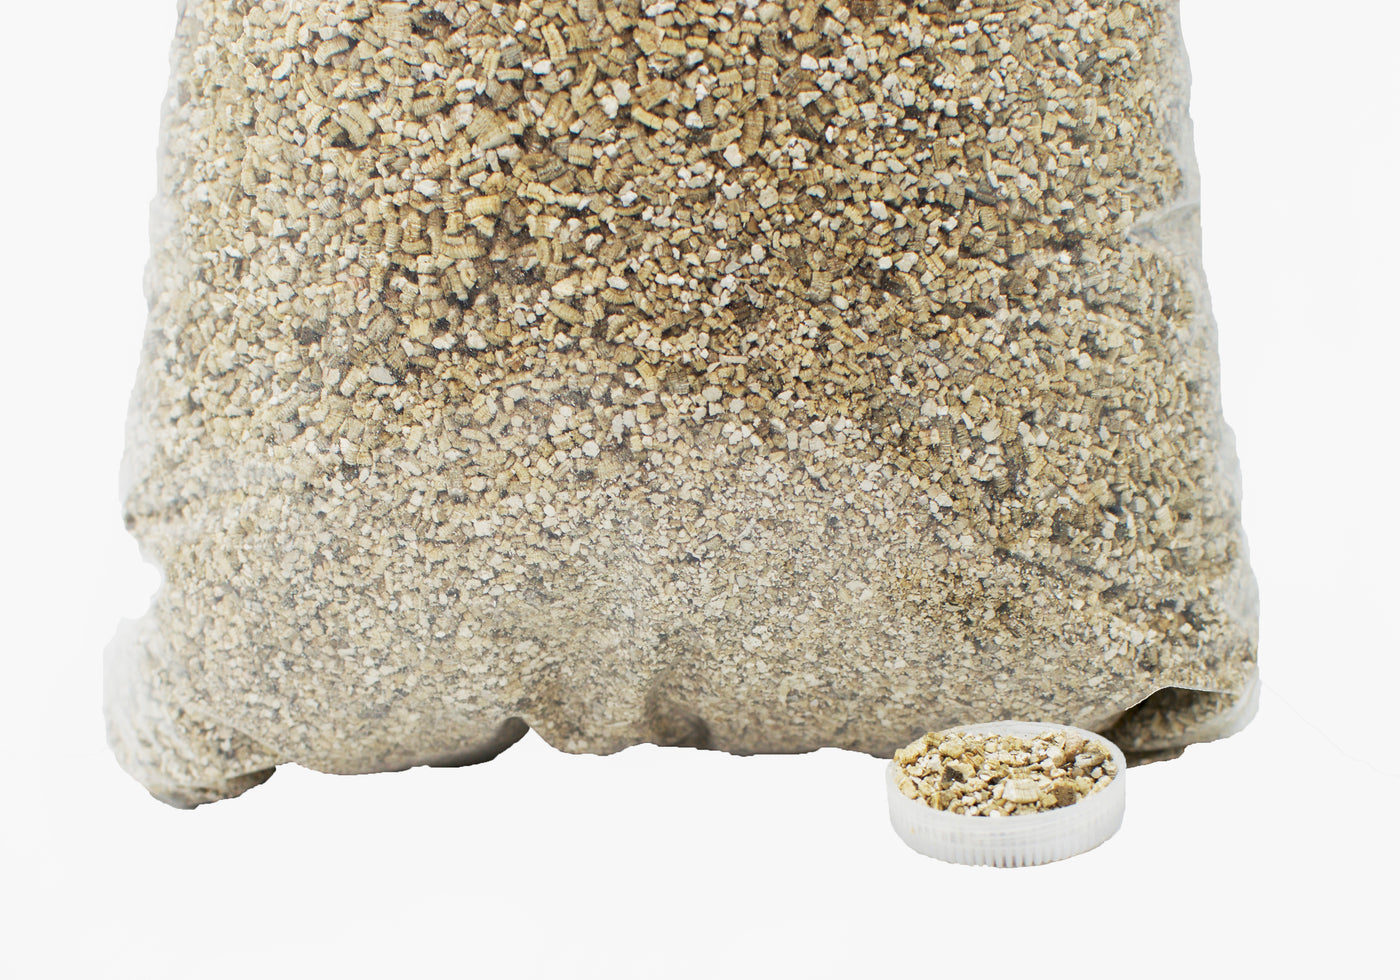 Vermiculite for Plants and Incubation